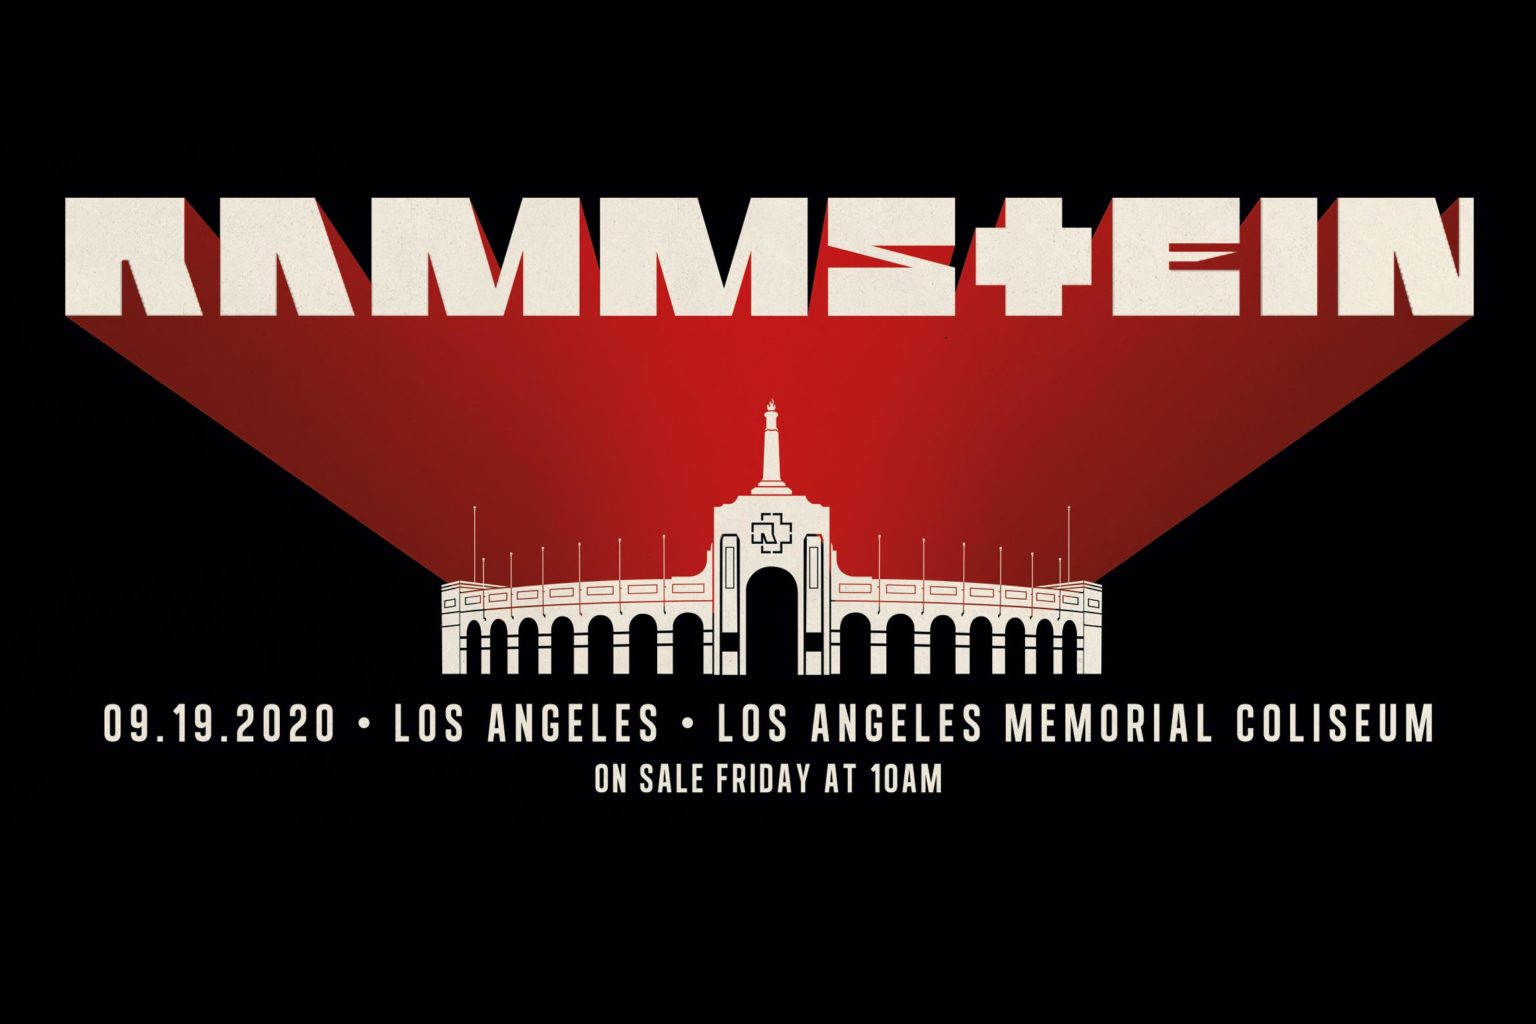 Rammstein Coming To The Iconic Los Angeles Memorial Coliseum On